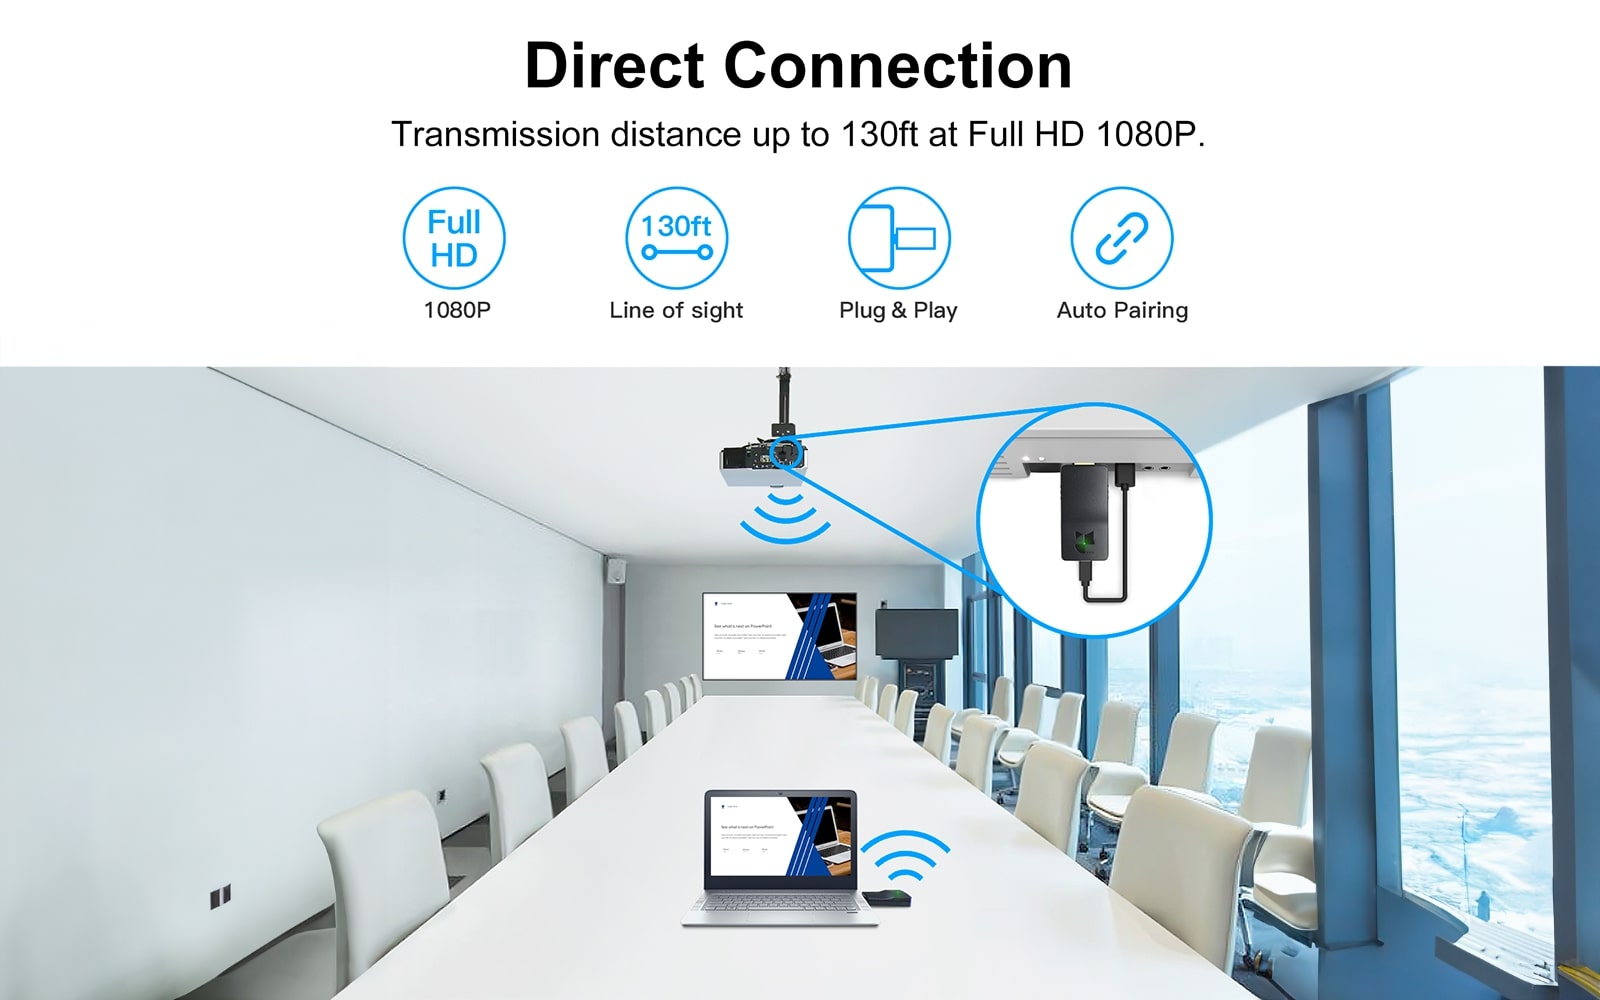 whe-10t wireless hdmi extender transmitter-direct connection